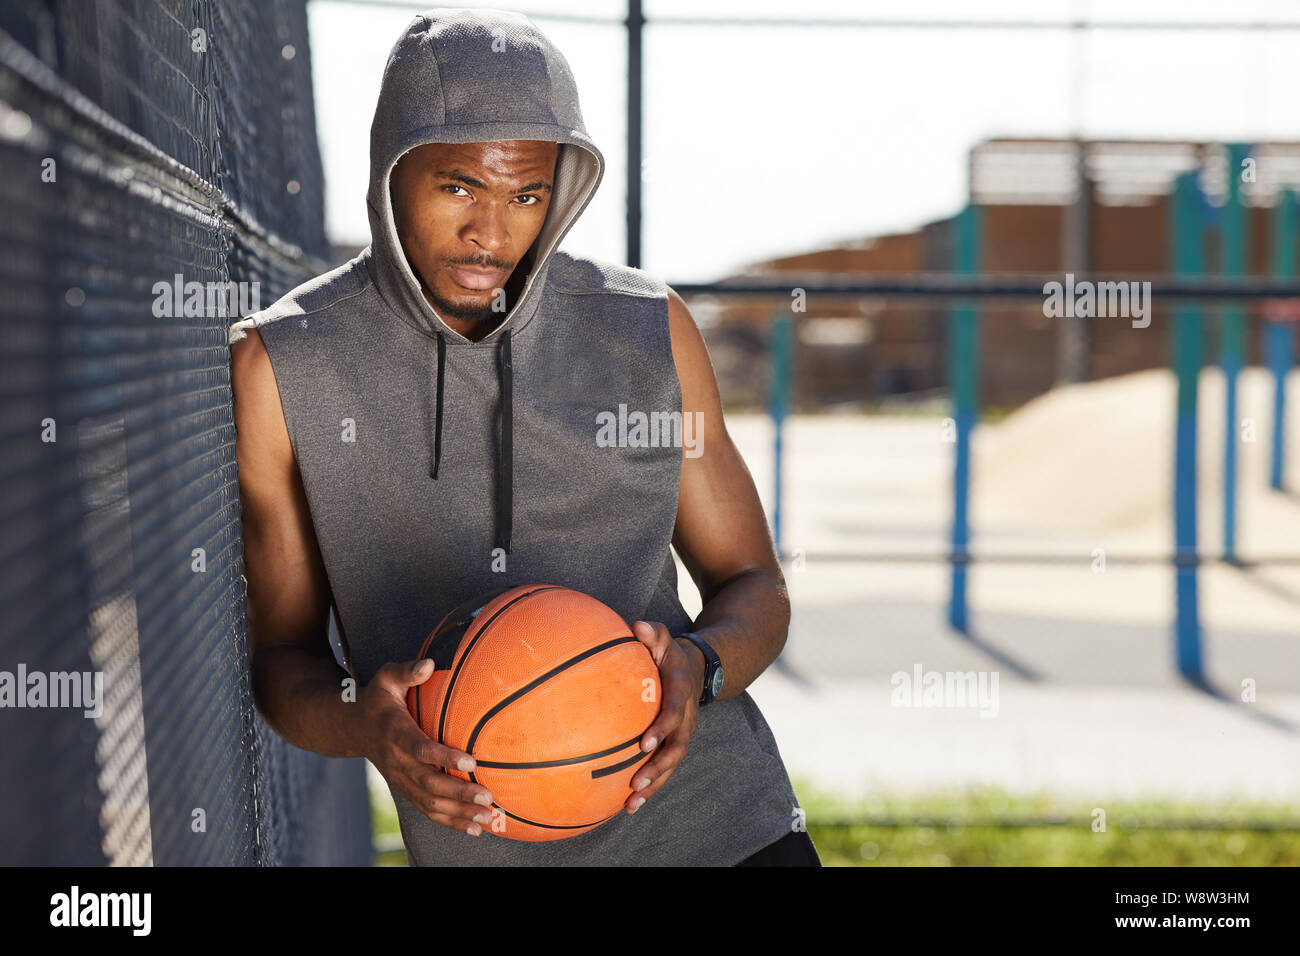 Waist up portrait of contemporary African-American man holding basketball ball looking at camera while posing in sports court outdoors, copy space Stock Photo